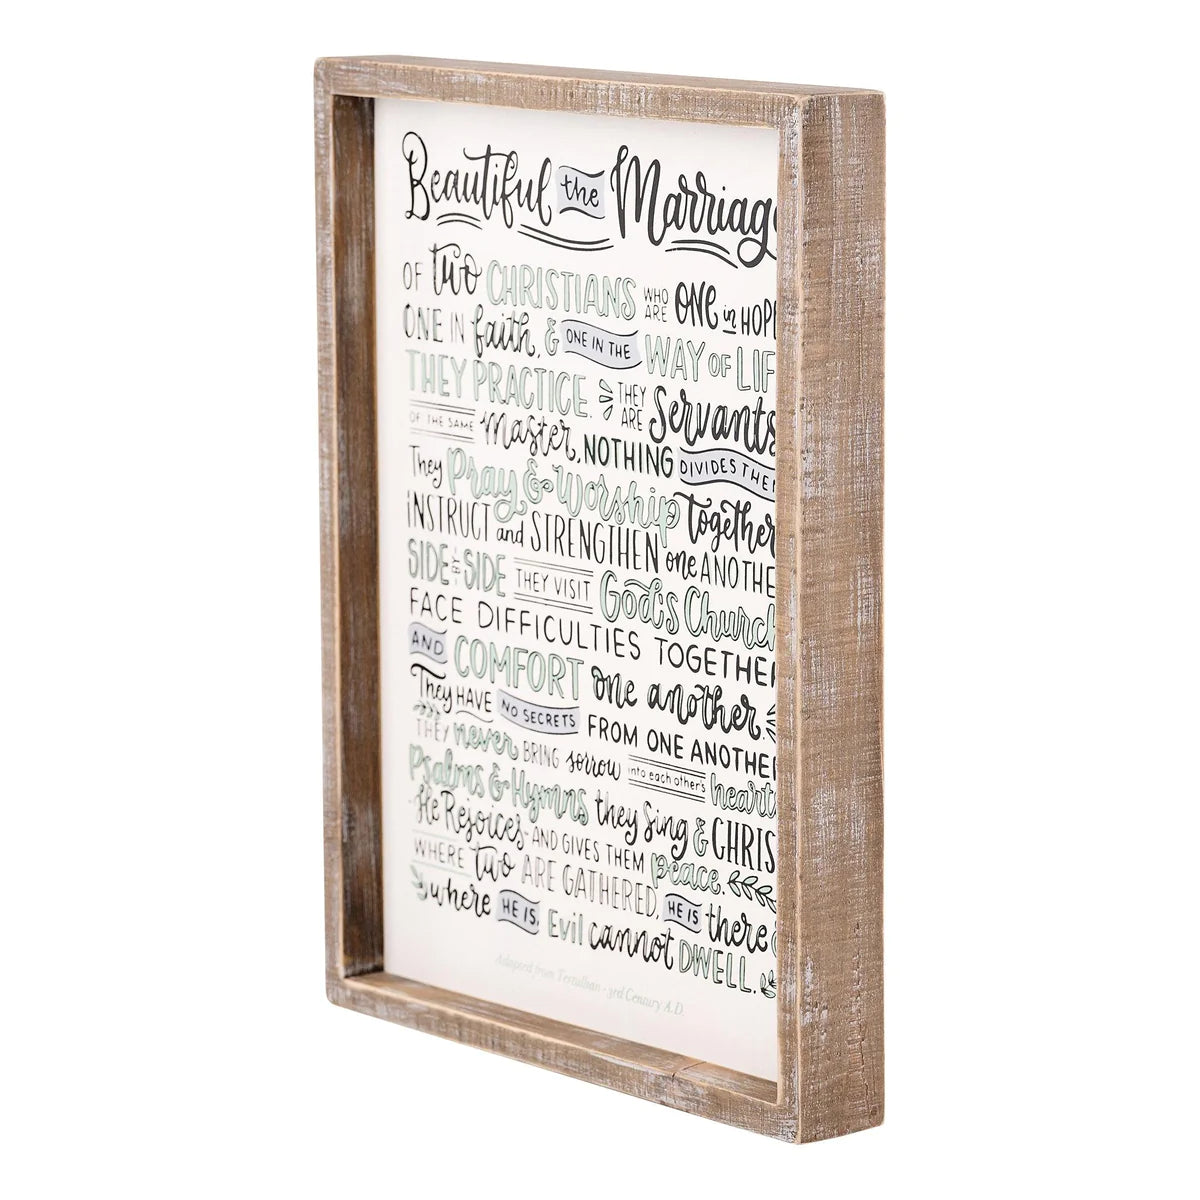 Beautiful the Marriage Framed Board Large